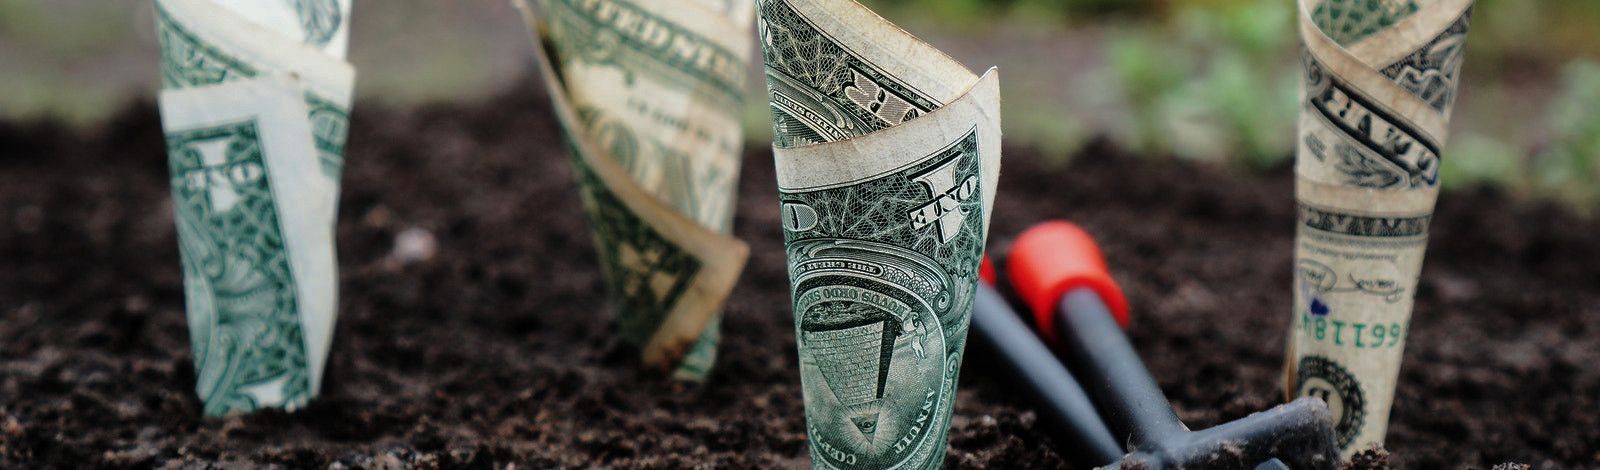 Photo of dollar bills rolled up and planted in fresh dirt, as if they were plants. Two gardening tools with red handles and black bodies sit between two rolled up bills on the right side.